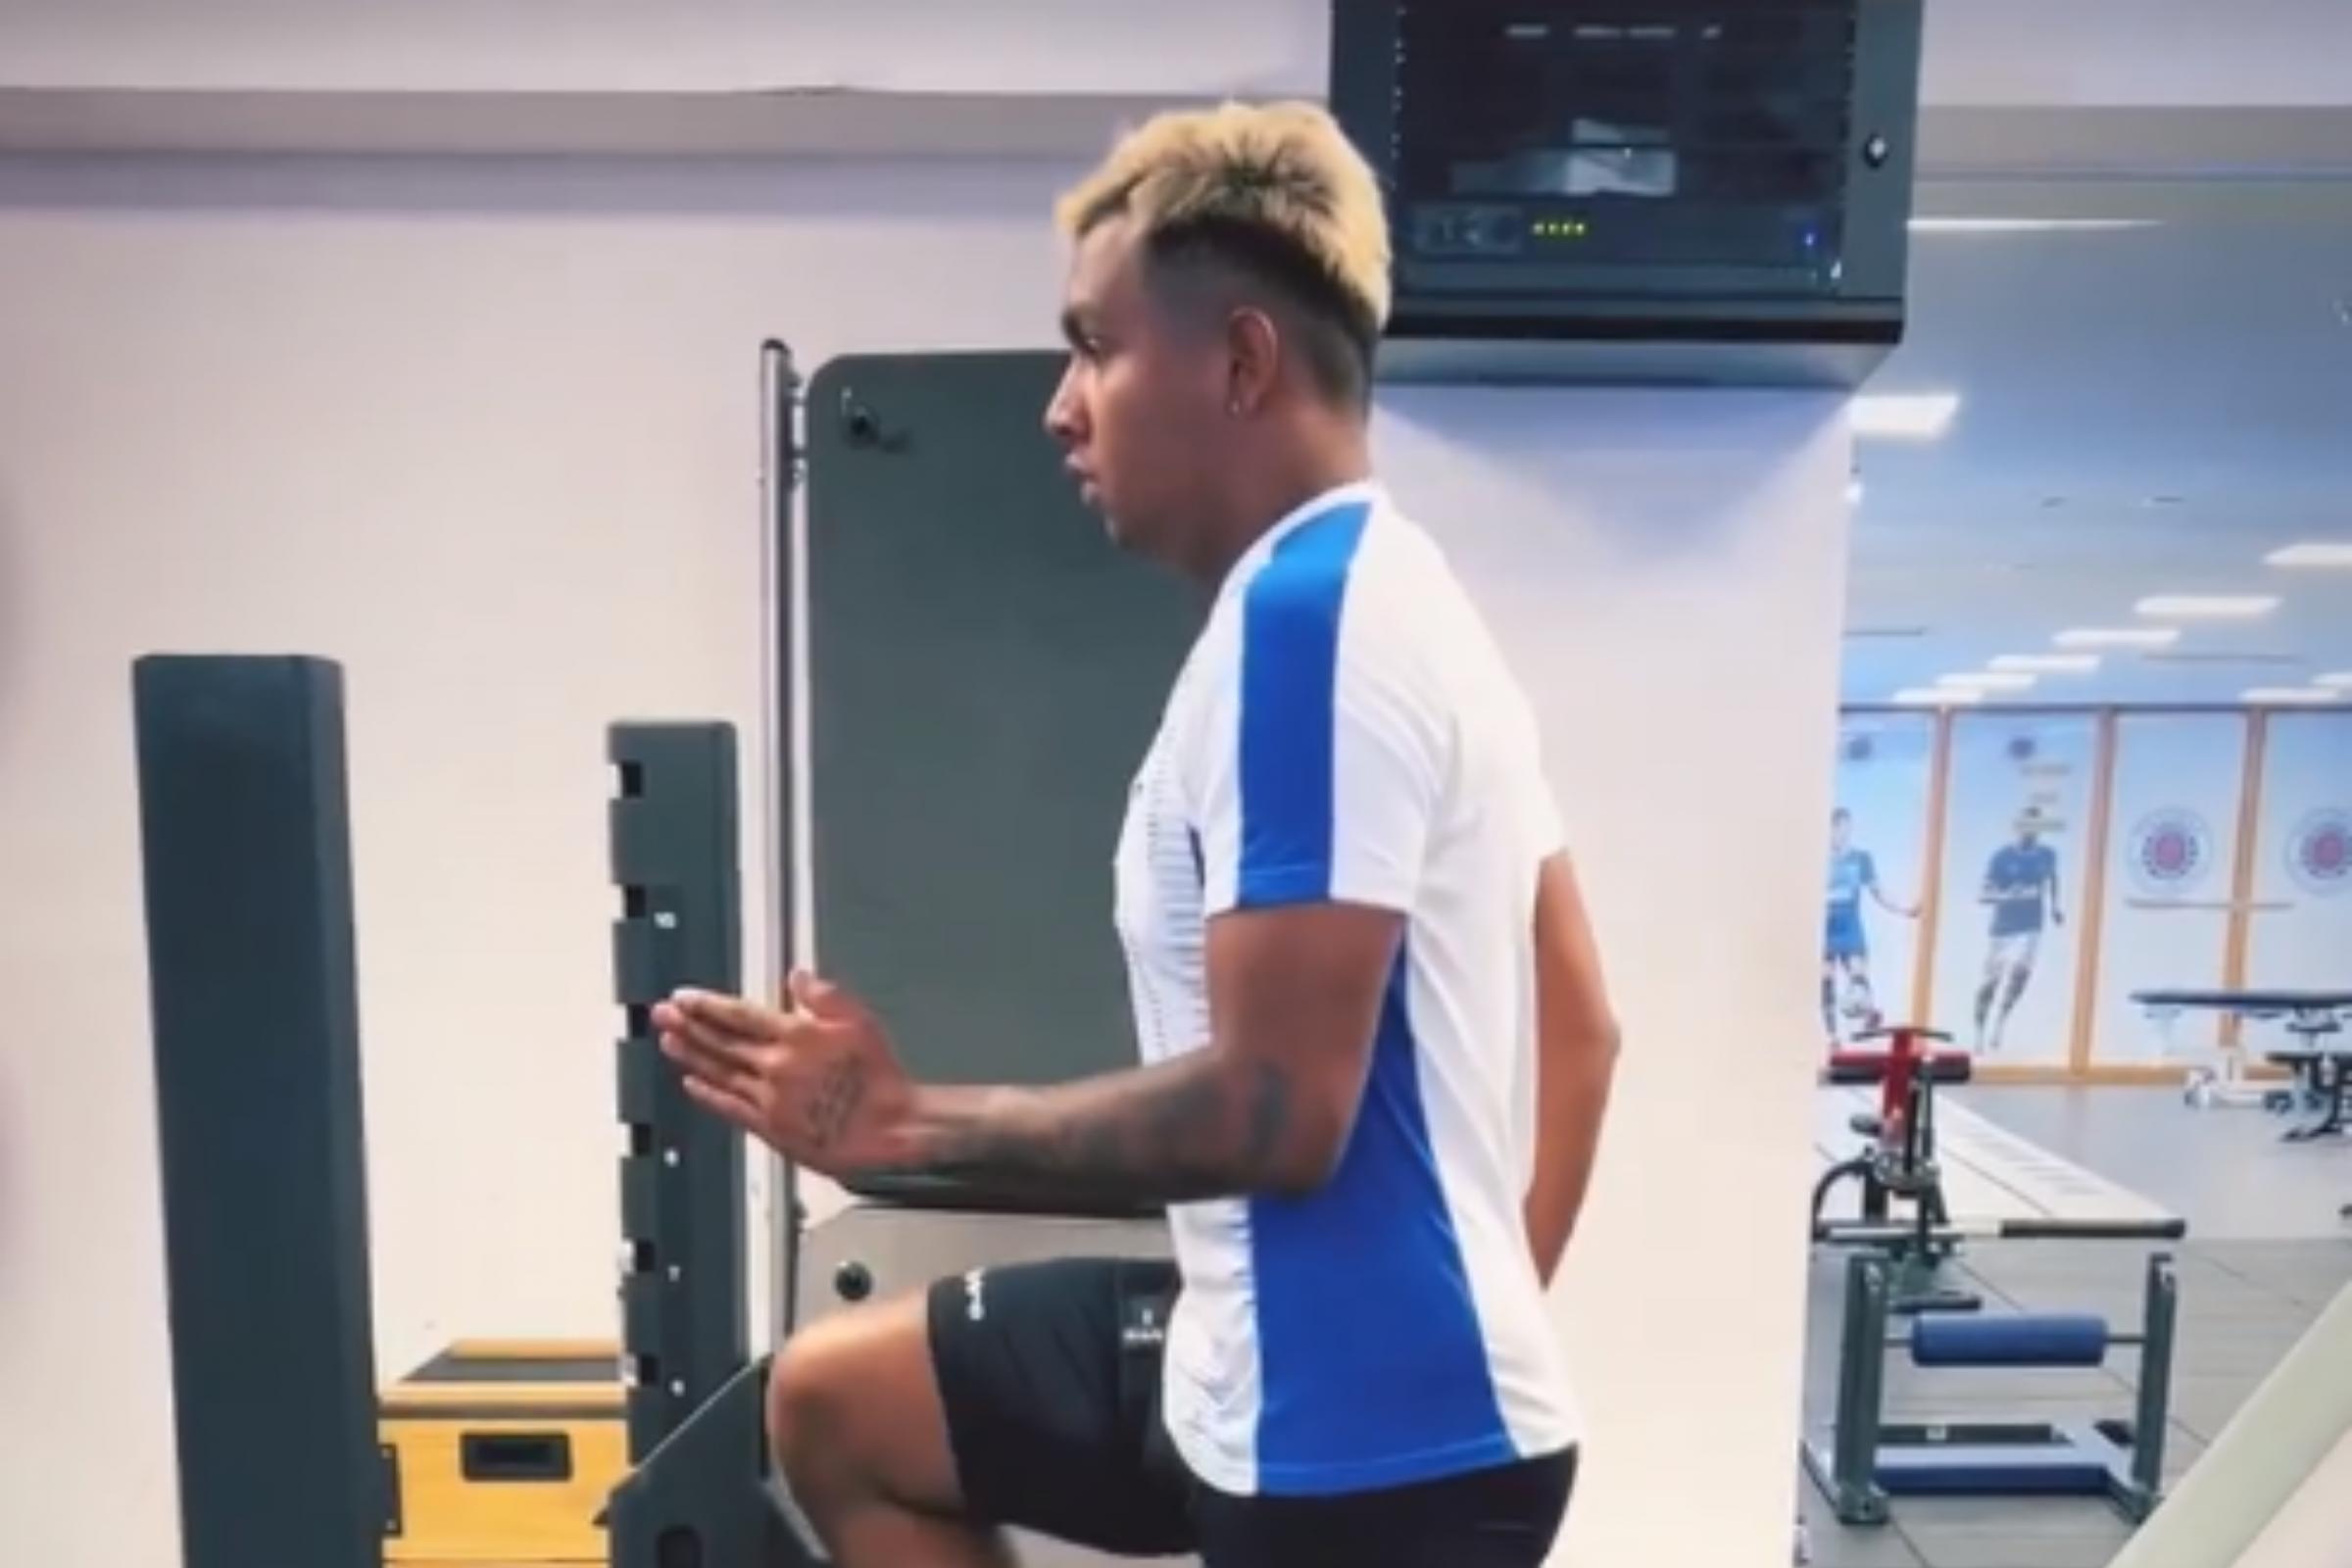 Rangers star Alfredo Morelos updates fans on recovery from injury